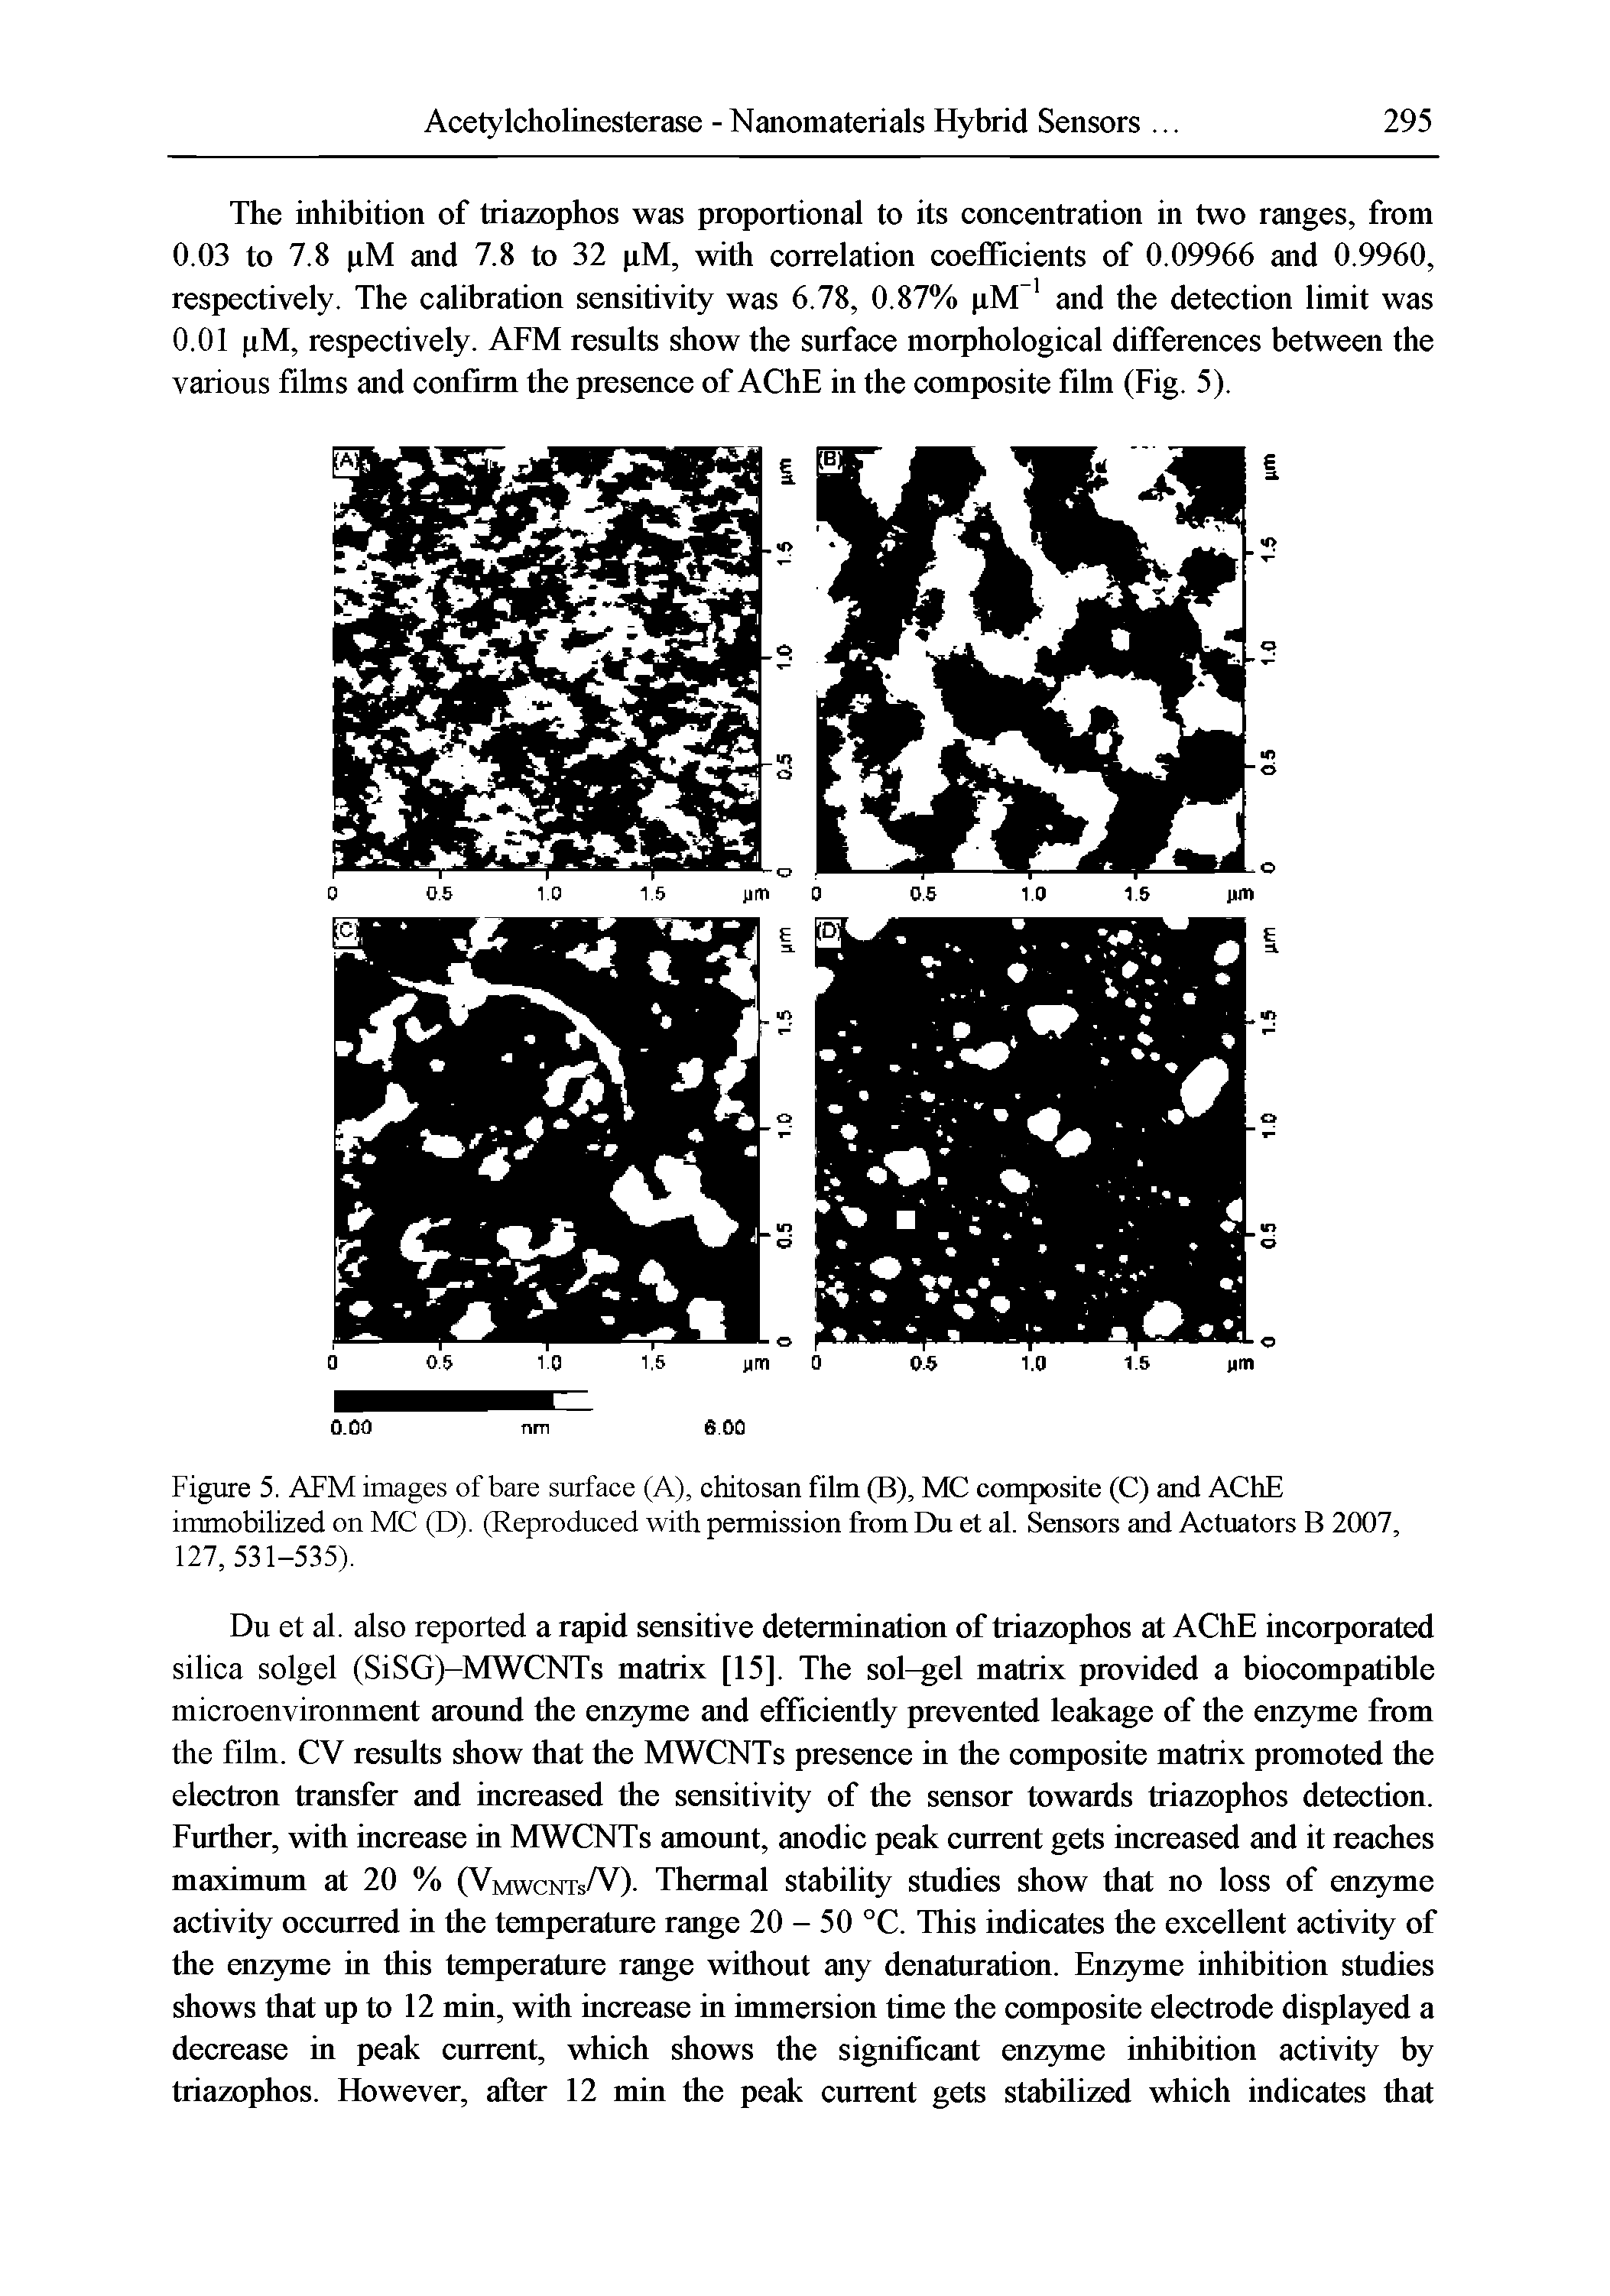 Figure 5. AFM images of bare surface (A), chitosan film (B), MC composite (C) and AChE immobilized on MC (D). (Reproduced with permission from Du et al. Sensors and Actuators B 2007, 127, 531-535).